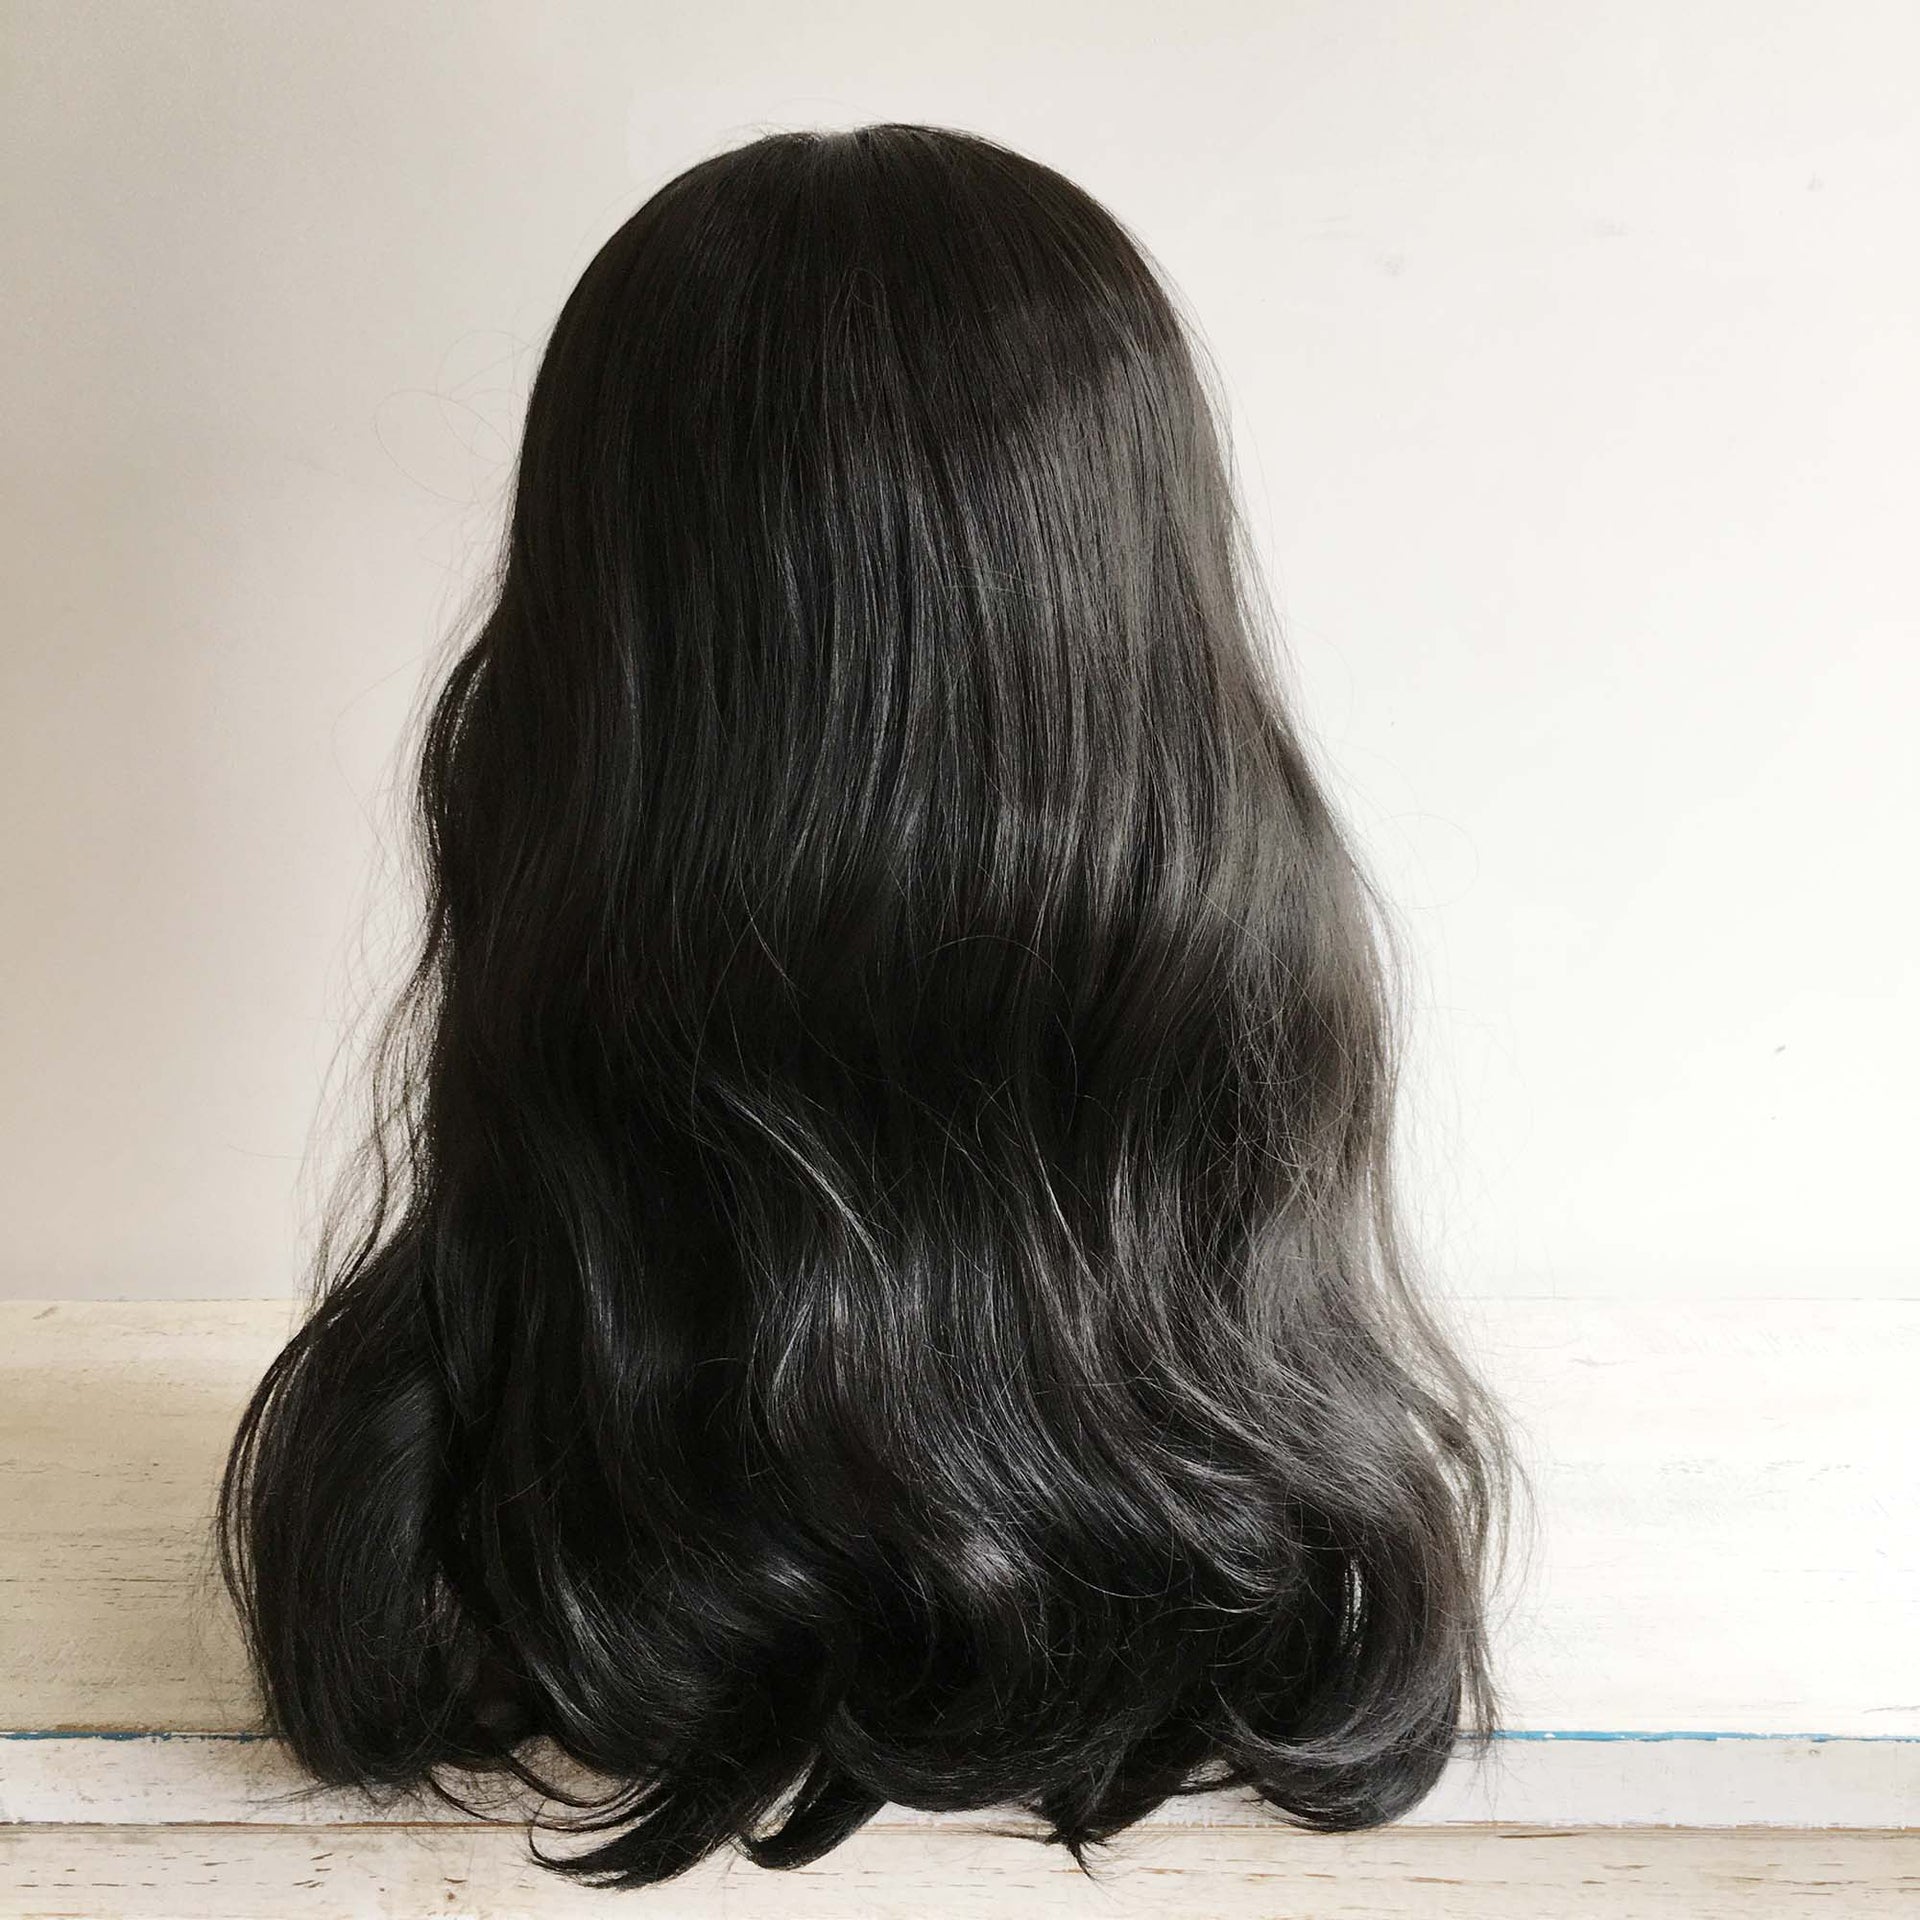 nevermindyrhead Men Black Long Wavy Middle Part Thick Volume Cosplay Costume Wig